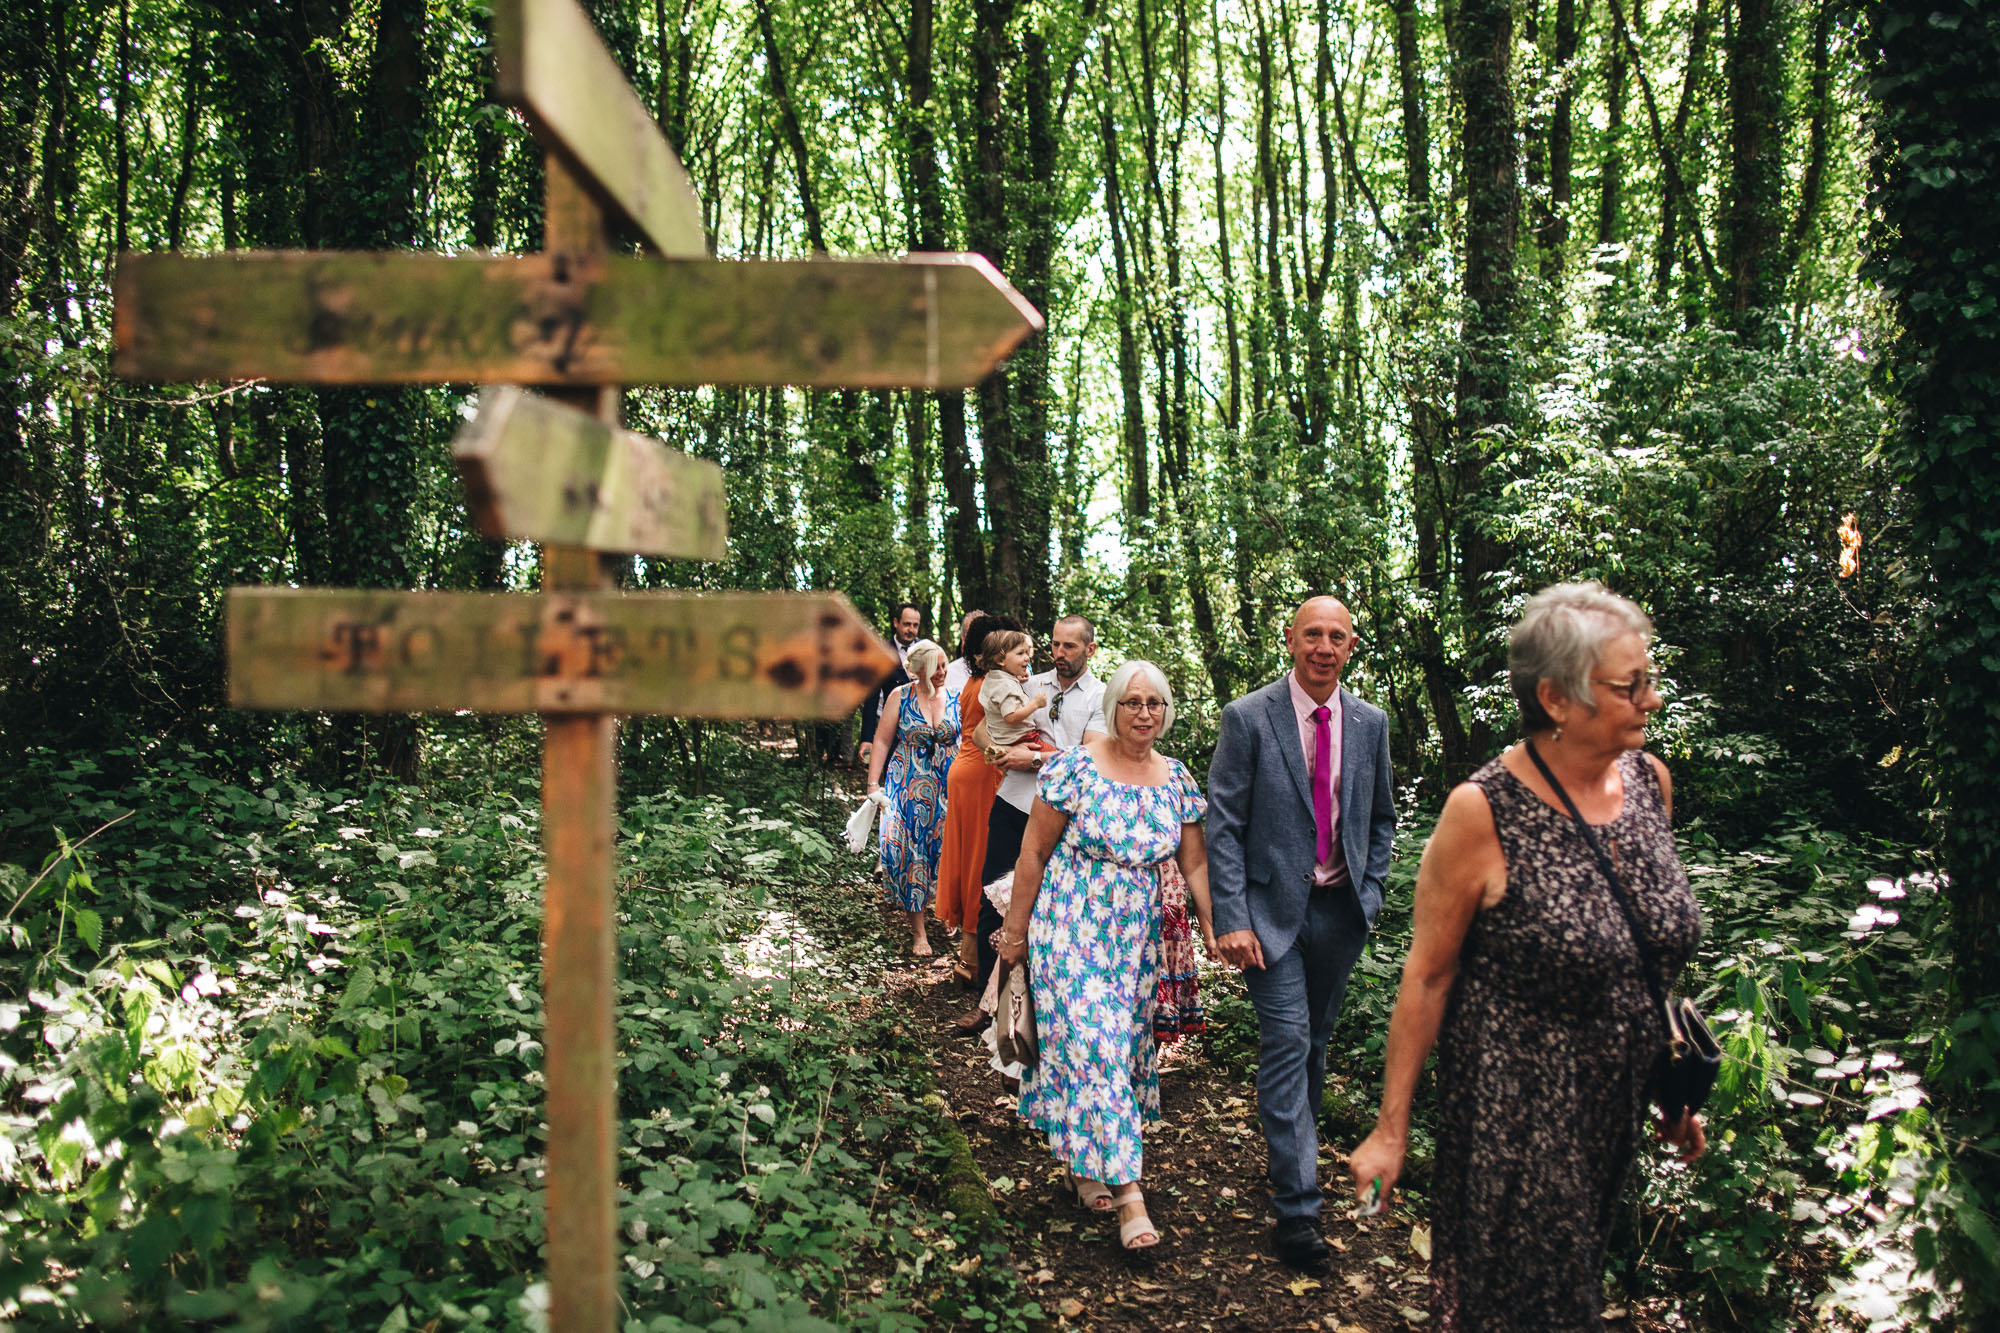 wedding guests make their way through the woods to the drinks reception